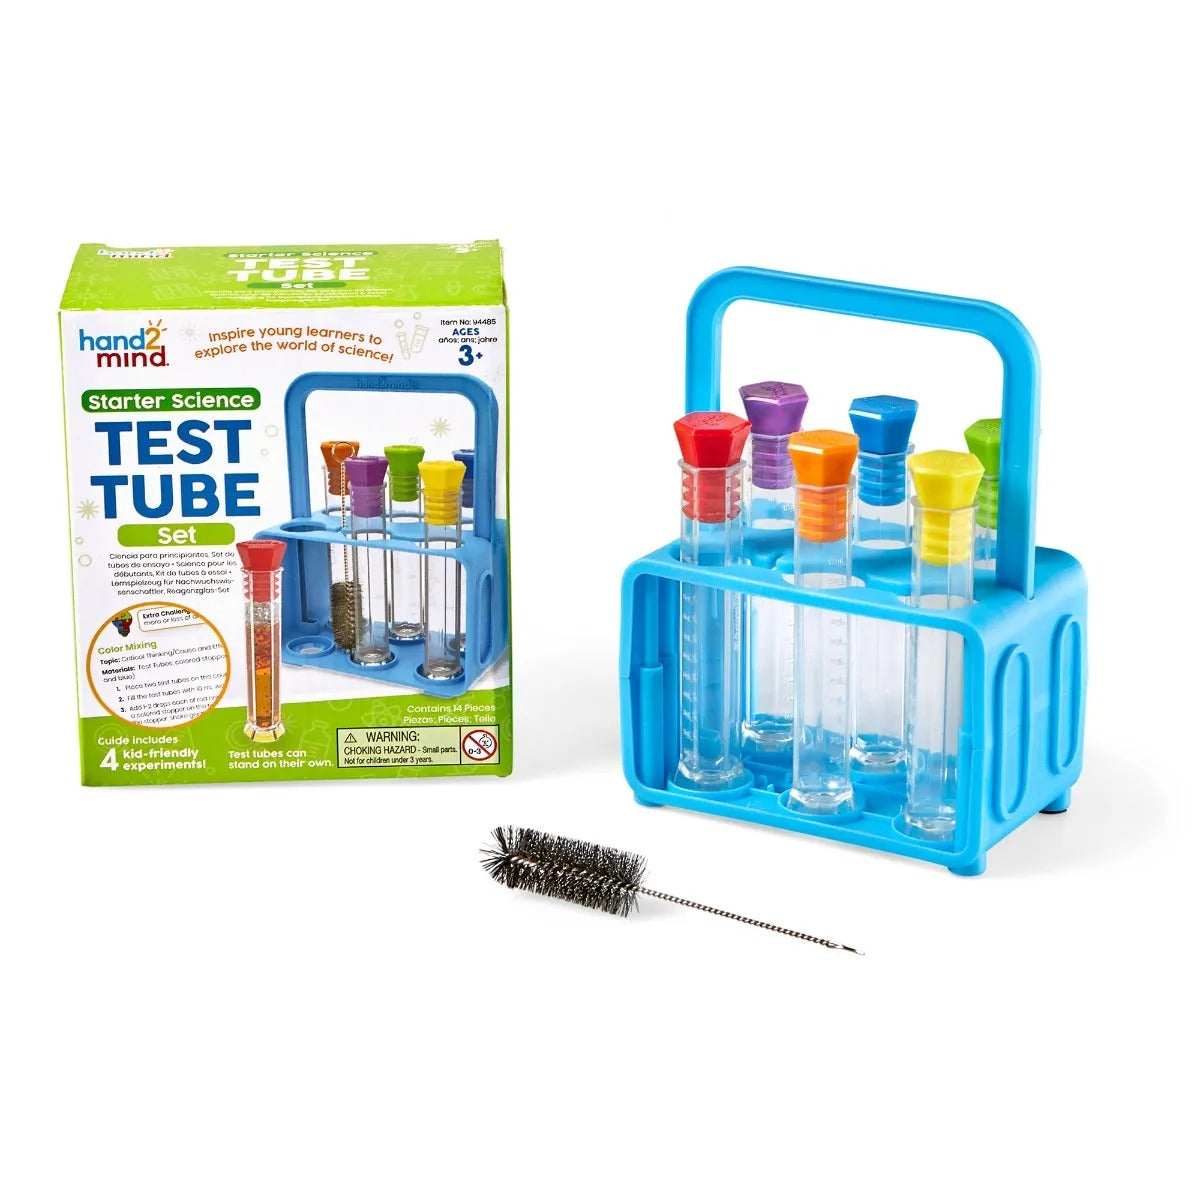 Starter Science Test Tube Set, The Starter Science Test Tube Set will inspire young learners to explore the world of science with 6 test tubes for kids and Activity Guide with 4 child-friendly experiments. Each hexagonal test tube has a base and can stand on their own and has a colourful hexagonal lid. This means these test tubes won’t roll off the table. The test tubes store upright in the convenient carrying rack and are easy to clean using the included cleaning brush. Children will love to experiment, ob